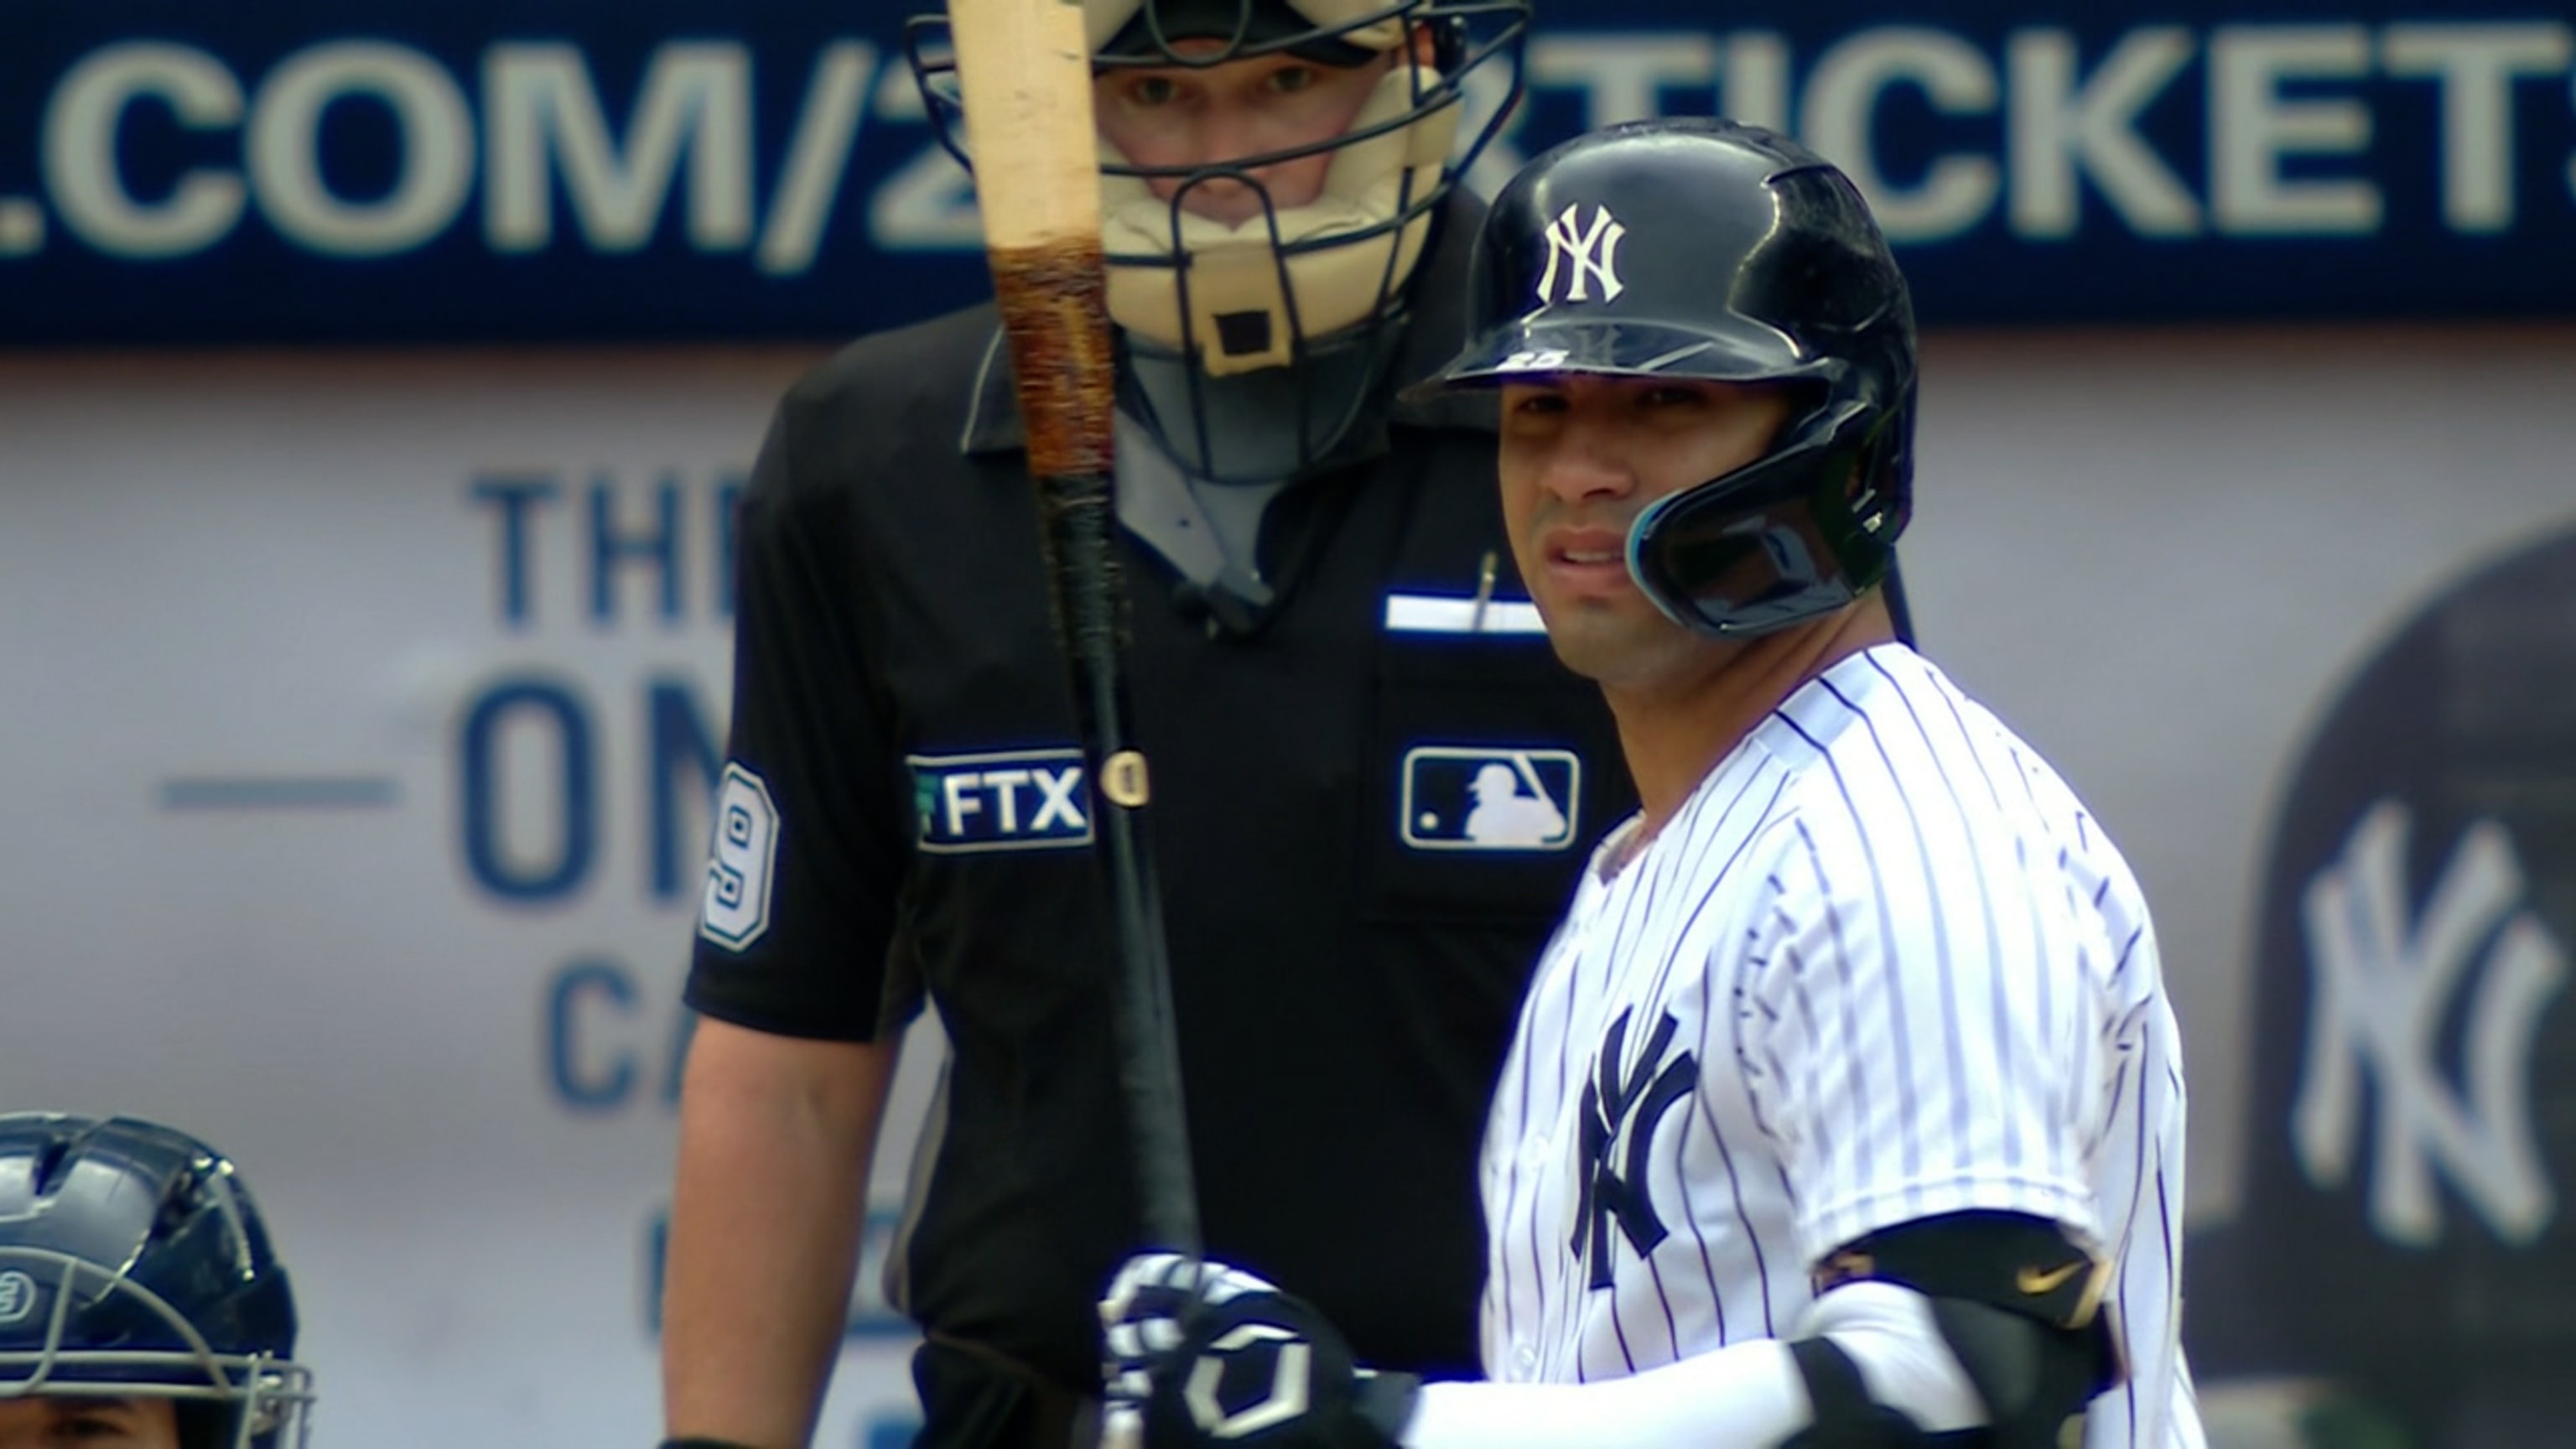 Aaron Judge: Yankees star hits homer number 55, keeping pace to